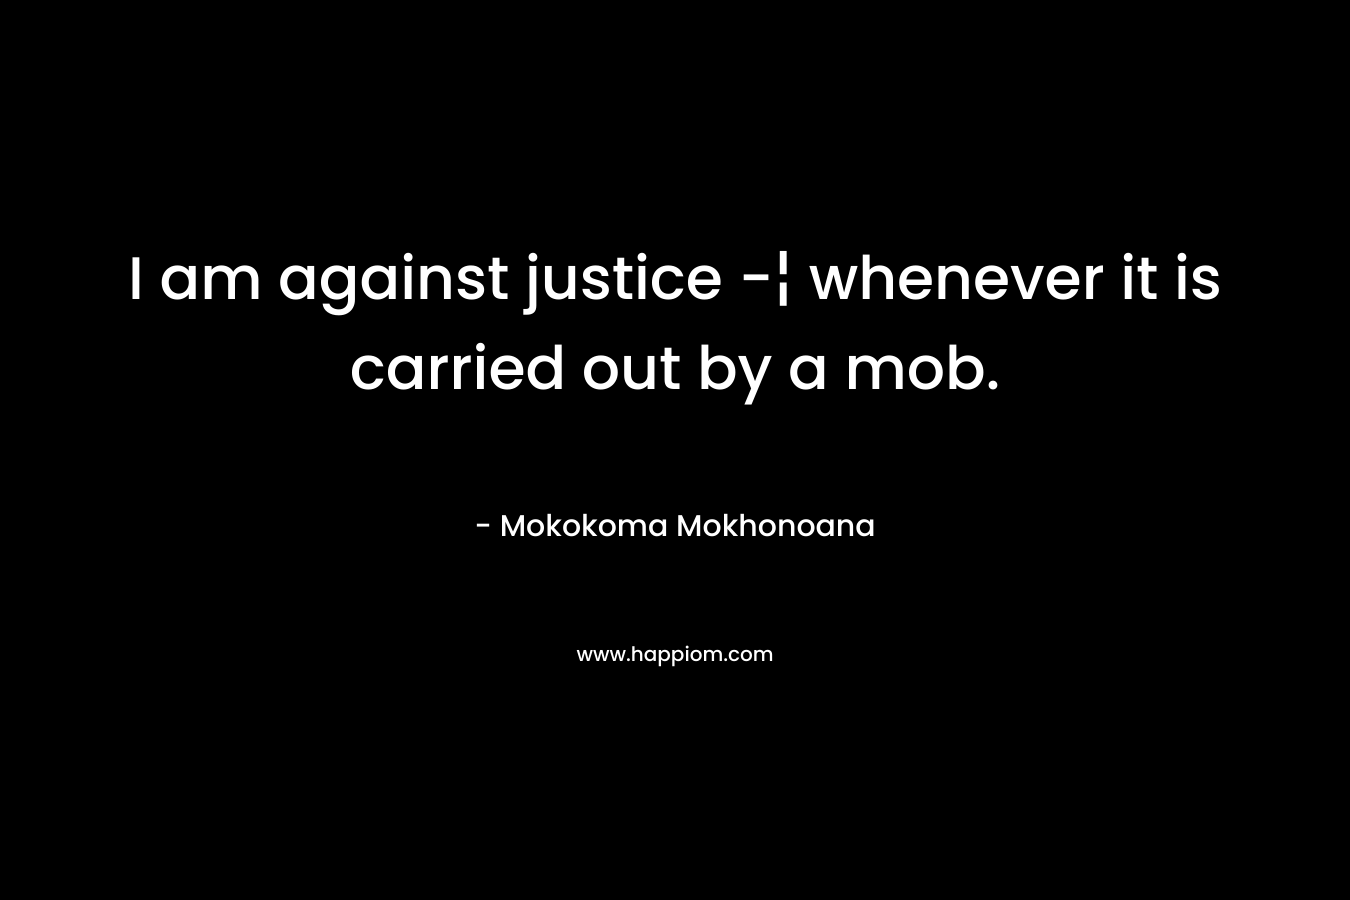 I am against justice -¦ whenever it is carried out by a mob.